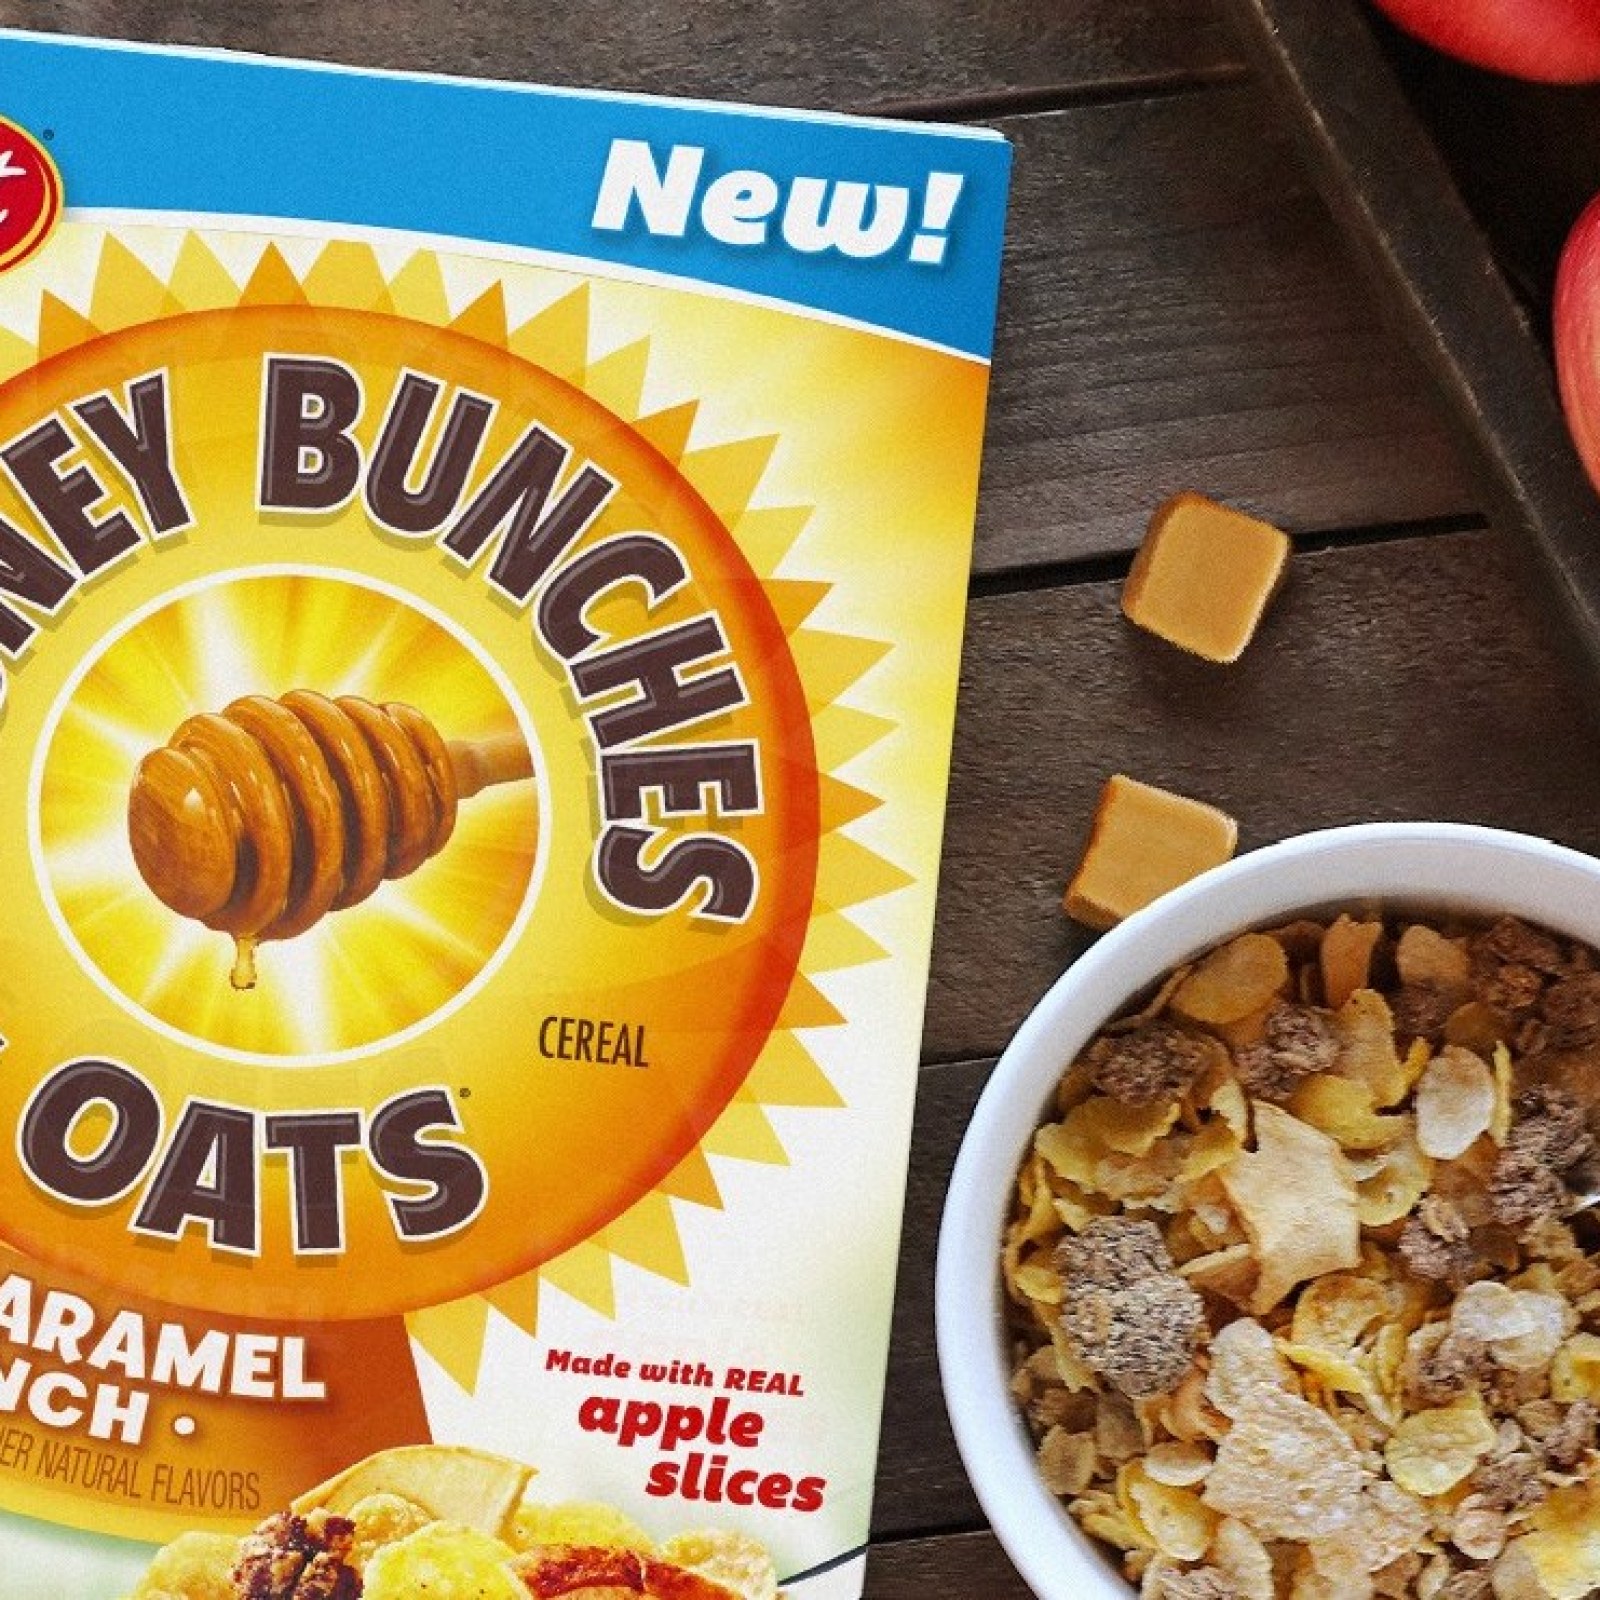 Honey Bunches Of Oats Strawberry Nutrition Facts ...